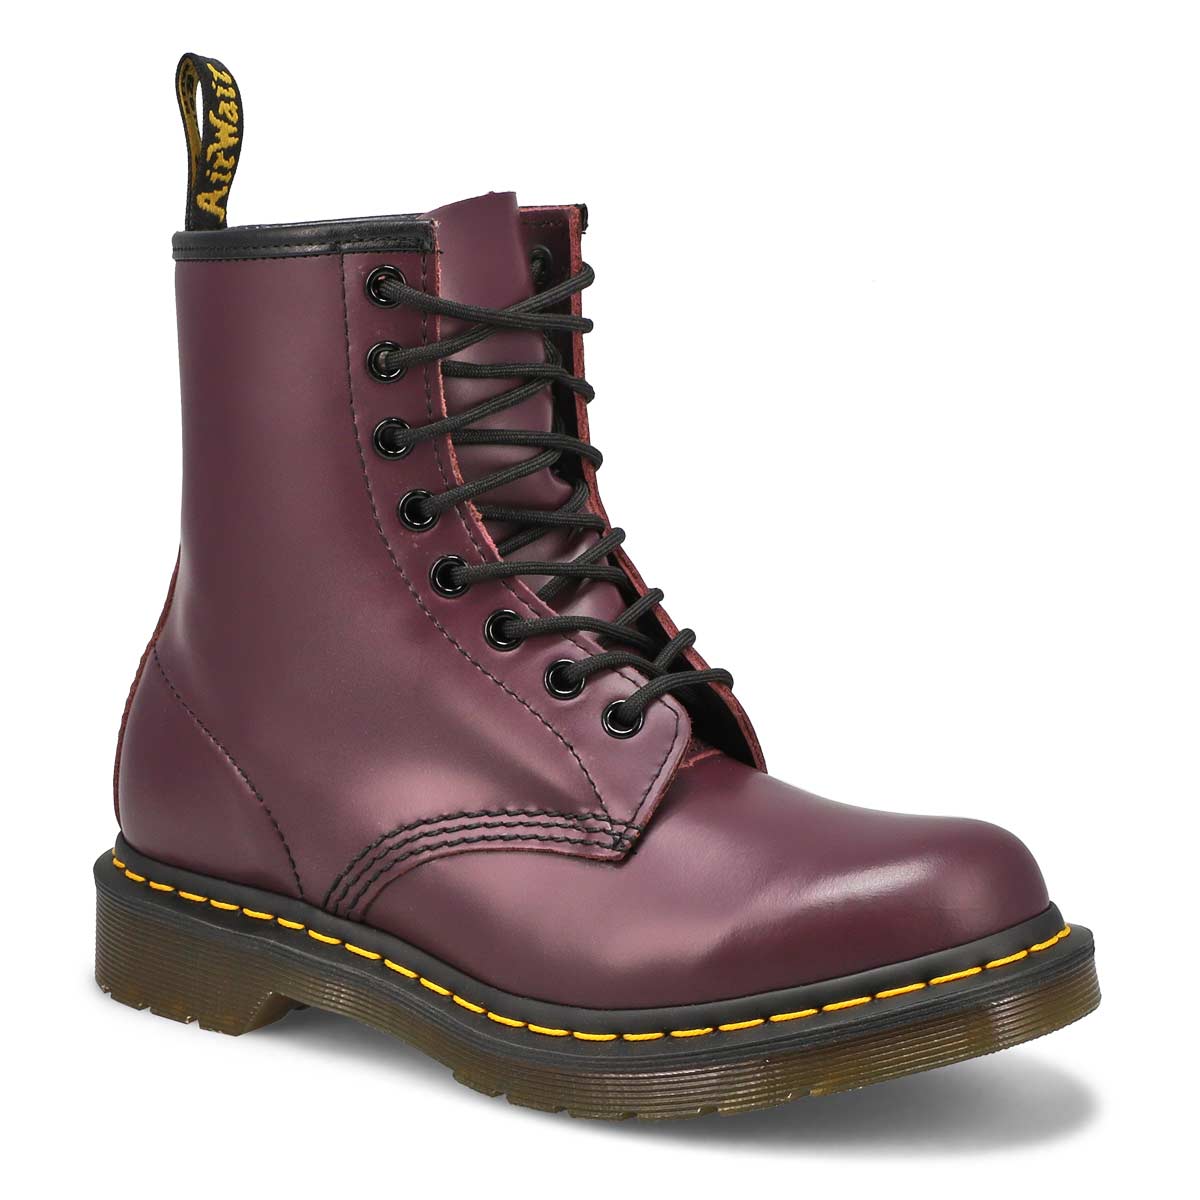 Dr Martens Women's 1460 8 Eye Smooth Leather | SoftMoc.com